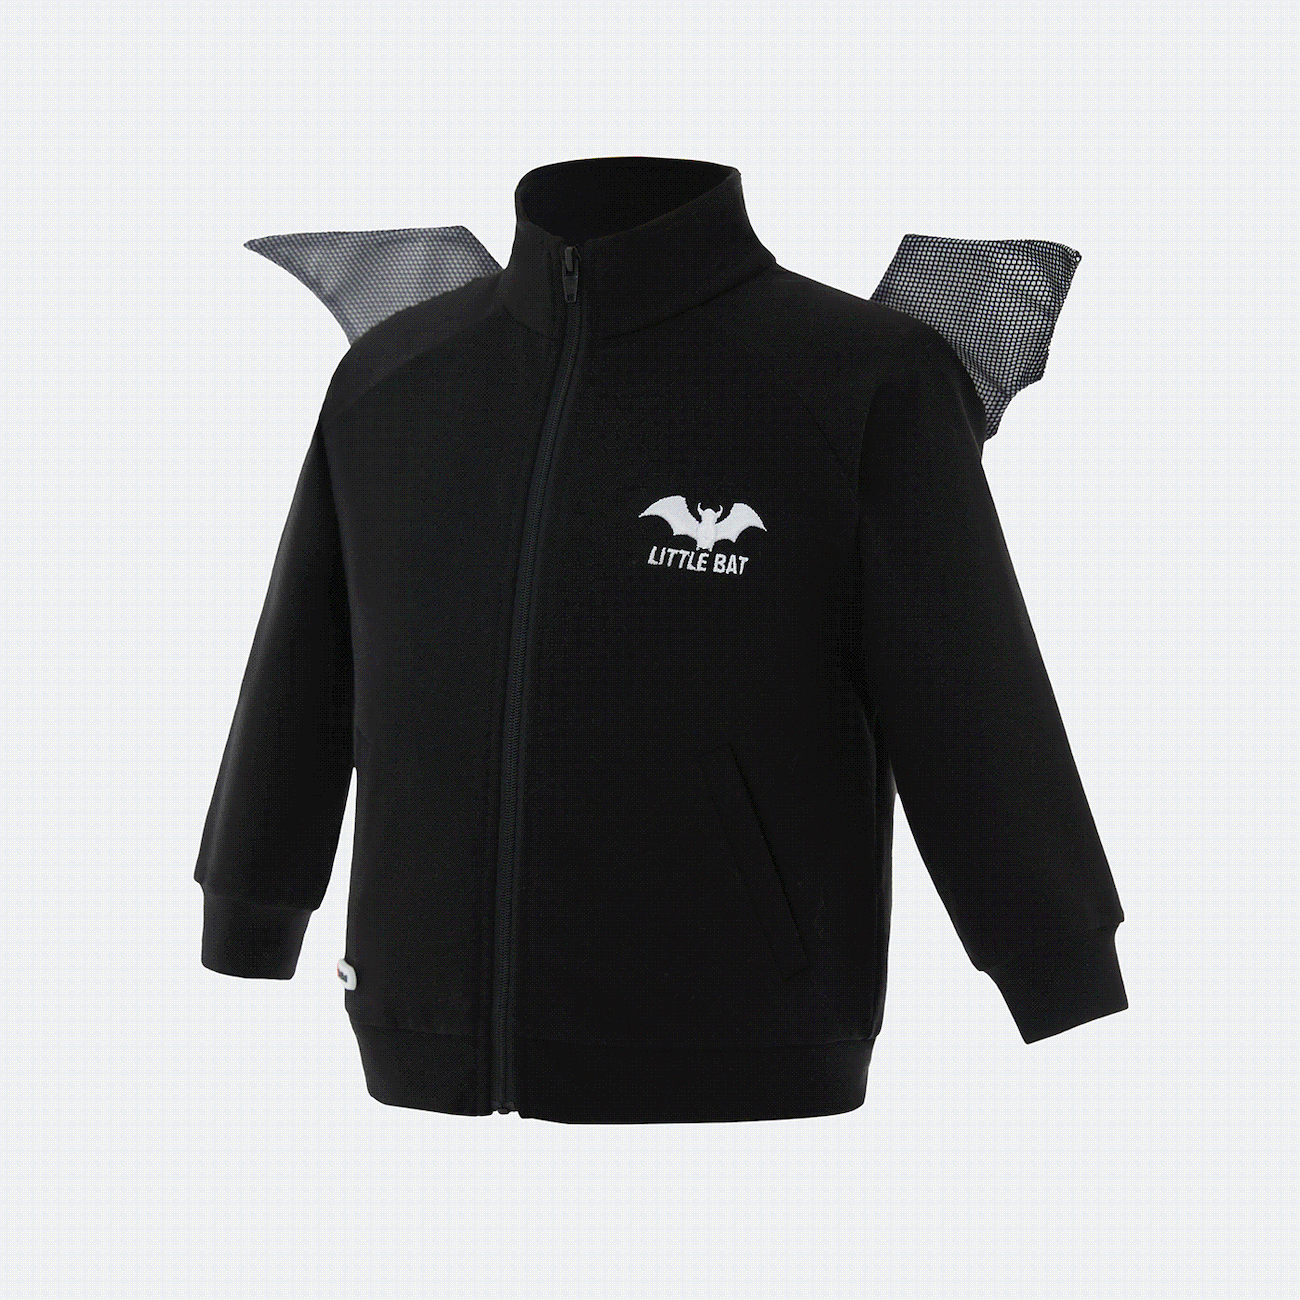 Go-Glow Illuminating Sweatshirt with Light Up Bat Wings Including Controller (Built-In Battery) Black big image 1